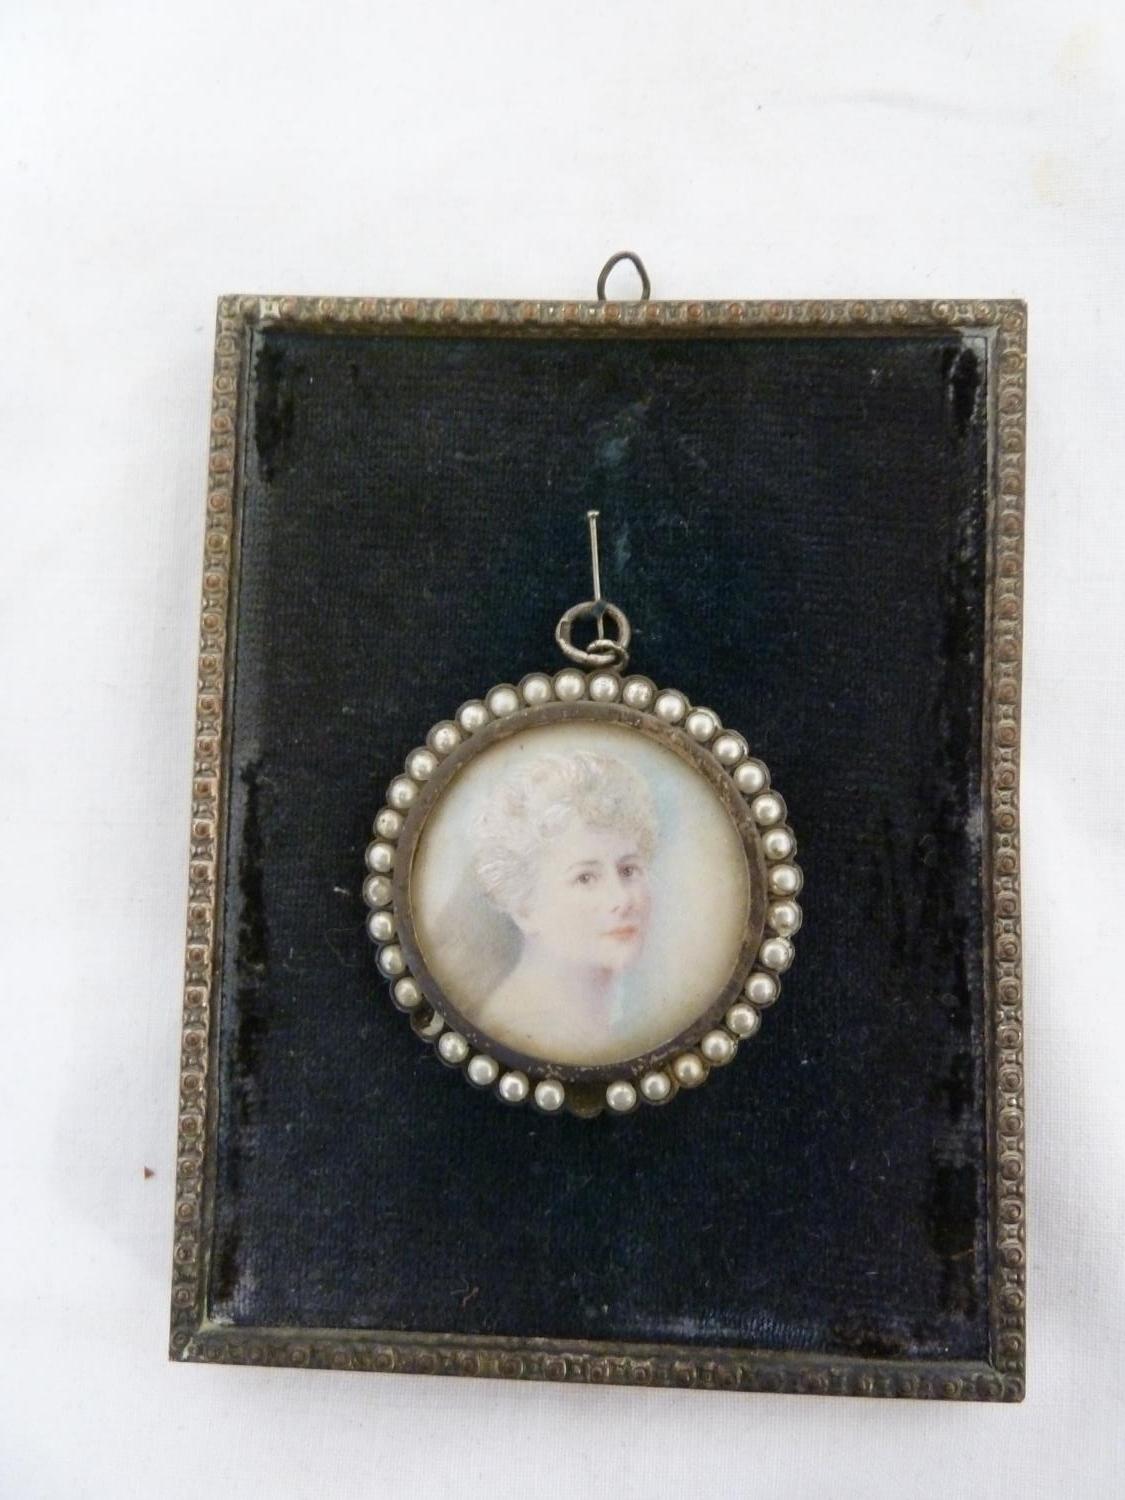 A portrait miniature of a woman, within a circular white metal frame set with half 'pearls', paper - Image 2 of 5